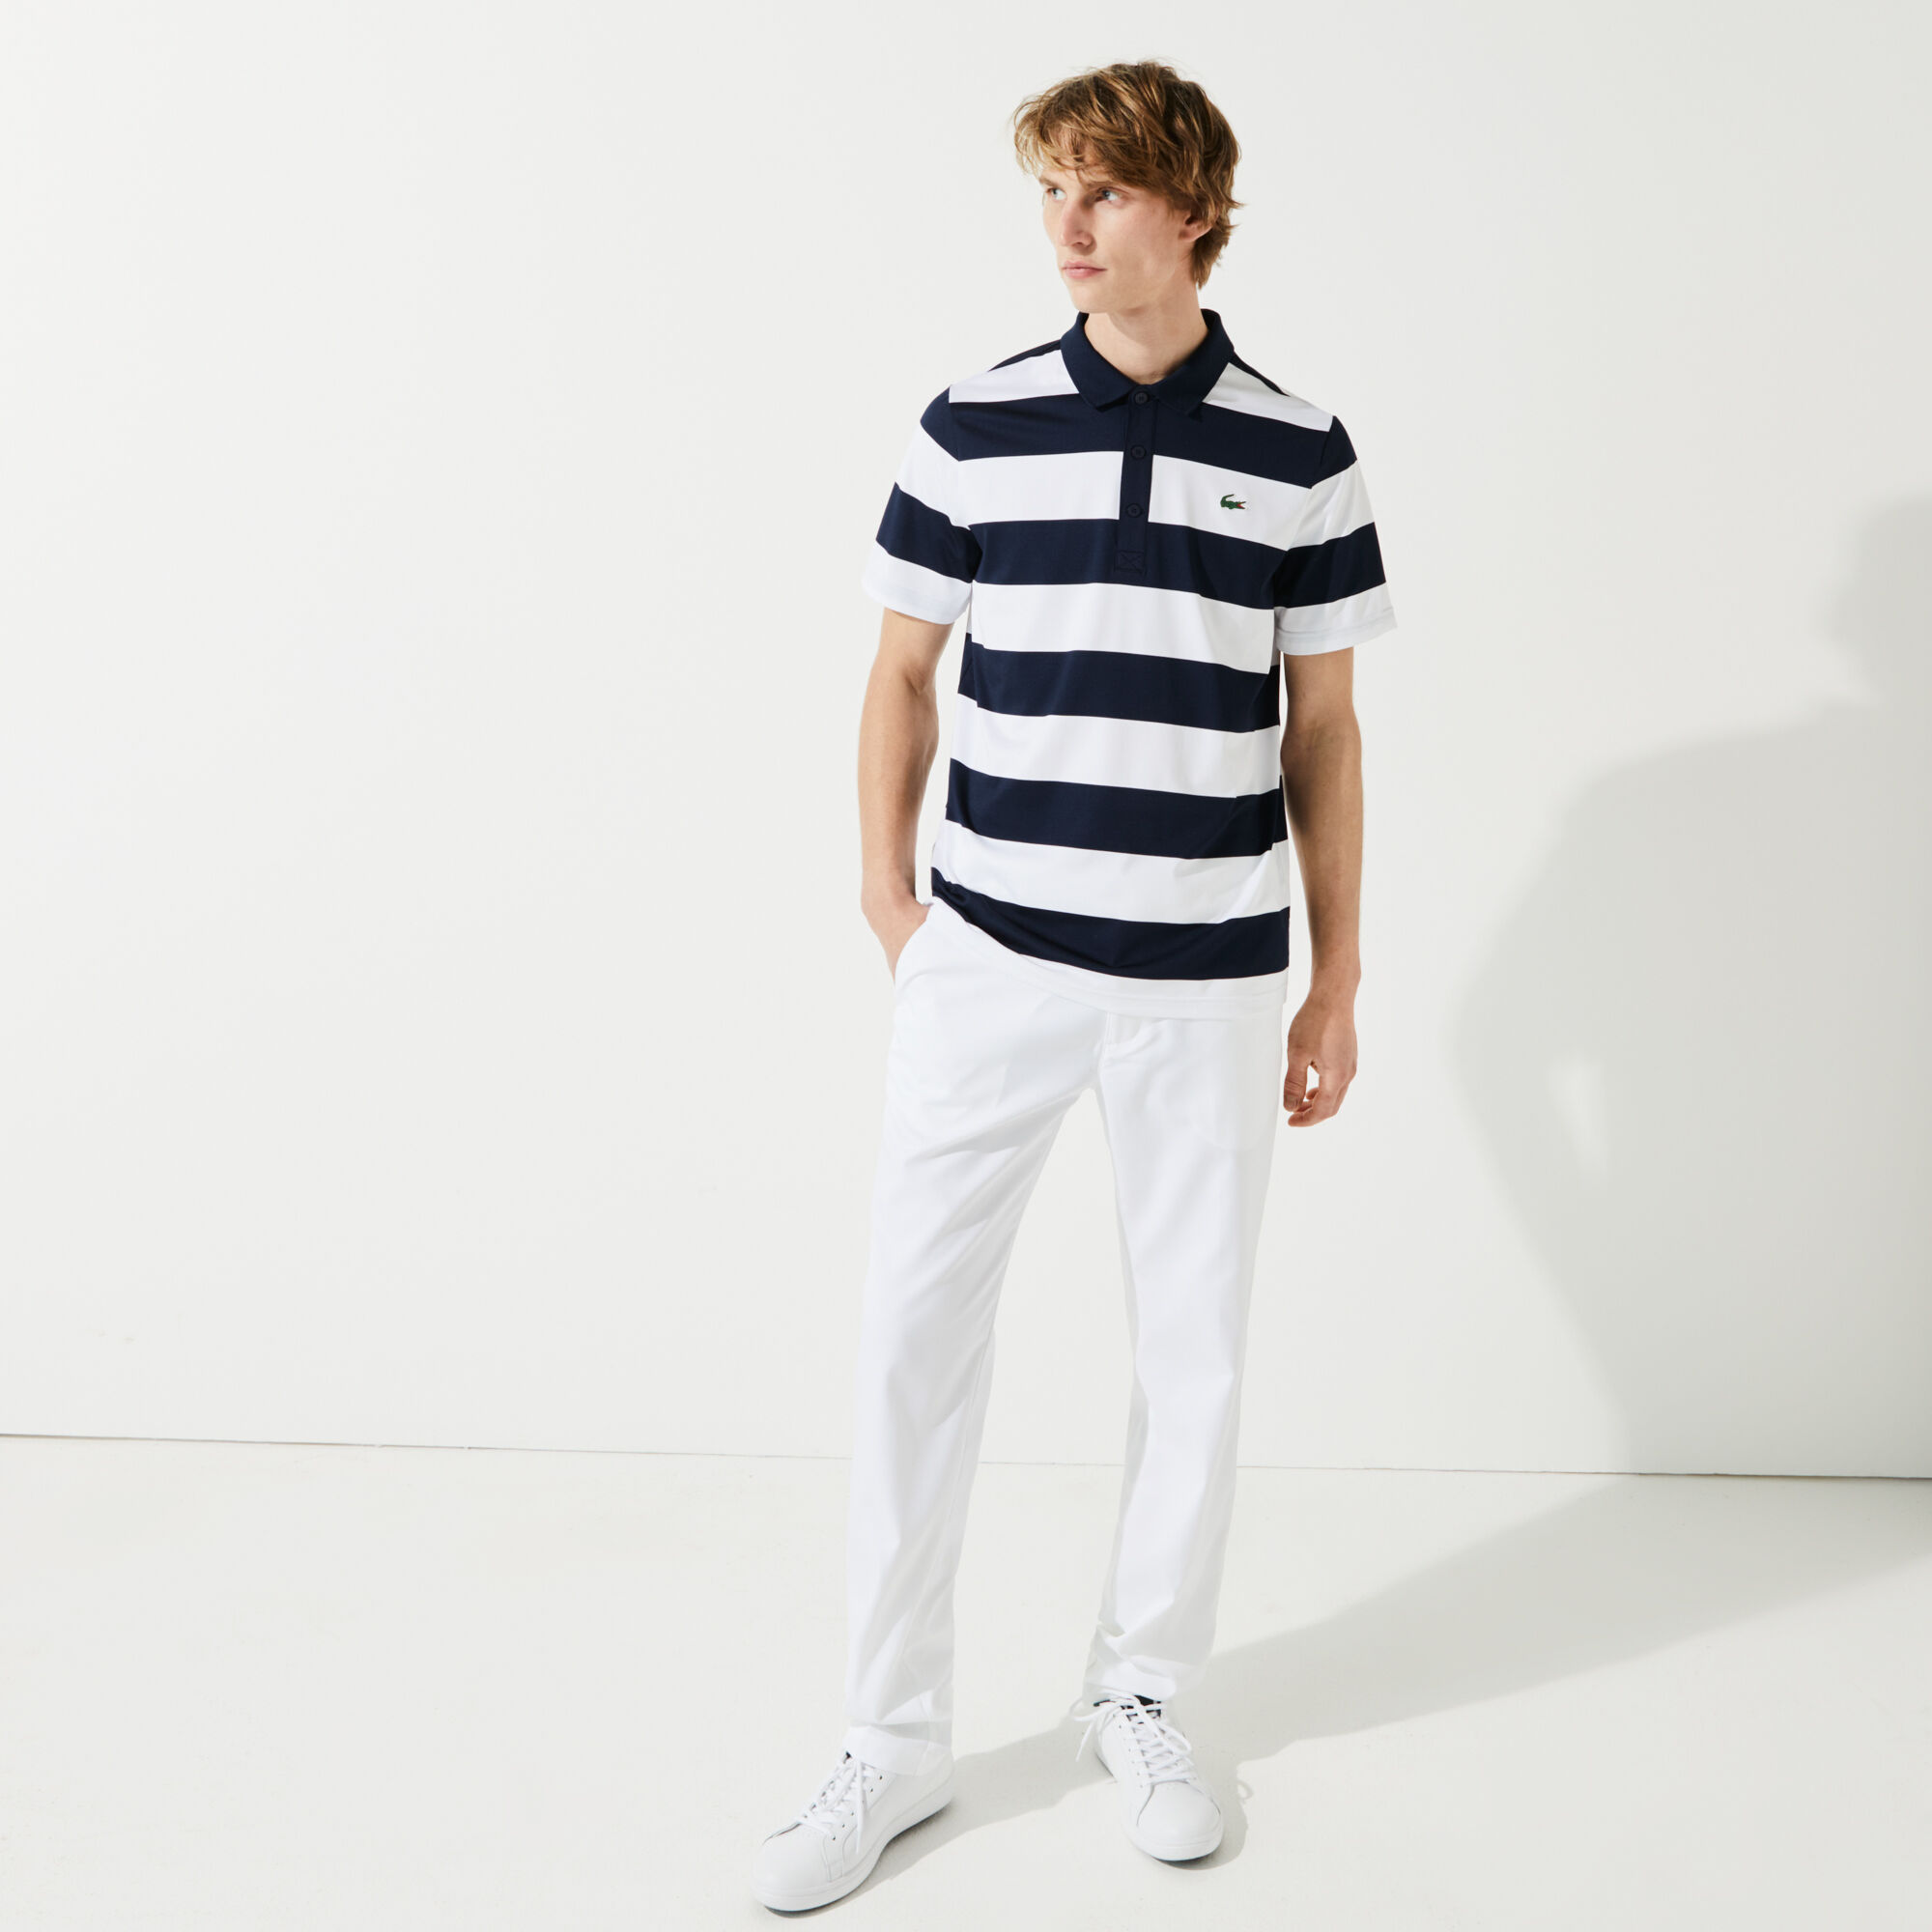 Men’s Lacoste SPORT Striped Breathable Stretch Golf Polo Shirt